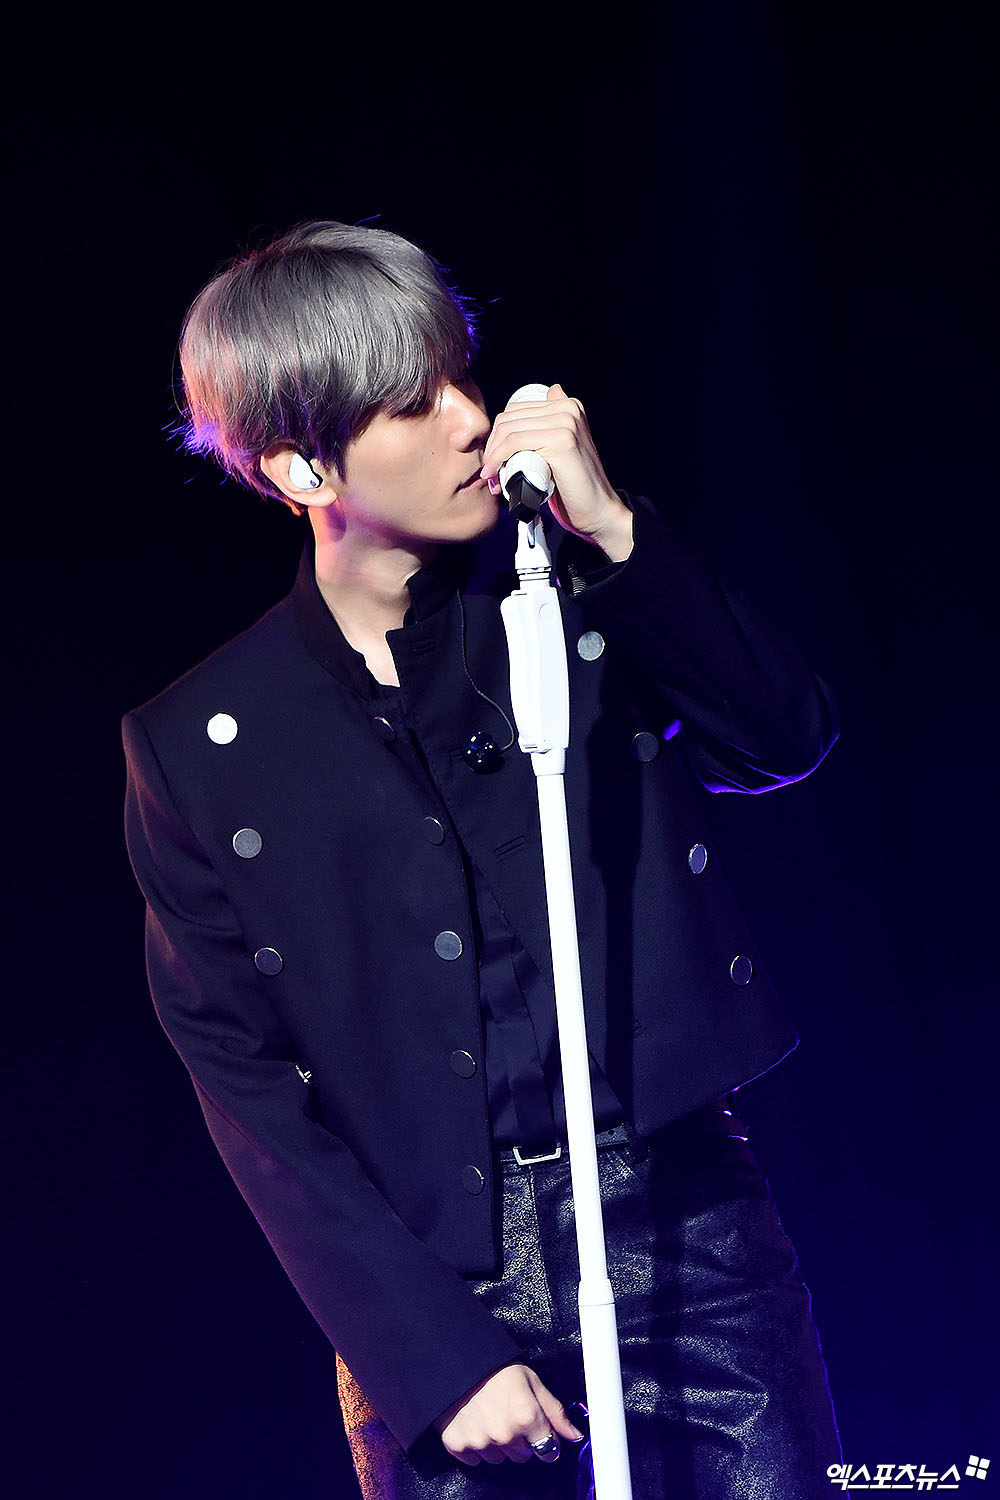 Group EXO Baekhyun has released his first solo album and has revealed his candid feelings about EXO.On the 10th, Showcase was held at SAC Art Hall in Gangnam-gu, Seoul to commemorate the release of the solo album City Lights by group EXO Baekhyun.The first solo City Lights by EXOs main vocalist, Baekhyun, featured six songs in a trendy atmosphere.The title is UN Village, a romantic R & B song.EXO, which debuted in 2012, has been very popular ever since its debut. It has also set a milestone called the Quintaple Millions.Baekhyun said there are fans on the basis of all these achievements.The cumulative sales of 10 million copies as EXO is a record that we can not come out without fans in reality rather than good, said Baekhyun.Baekhyun explains that he wants to repay his fans because he has a lot of things to receive.He always wanted to give something more, and his way of thinking was to comment on SNS and broadcast Love Live!Baekhyun said, I spent time with my fans and I thought you would wonder about your usual appearance. I made a body and made a comment that you are feeling better these days.In order to solve such a question, I thought one dimension was I can show it then.So I went to the fans with a good platform called YouTube. He said why he opened the YouTube channel and posted the V log.Now, only V logs are posted, but we will show more contents in the future.Many people ask EXO for the future over seven years. I think it is necessary to stay with the members as they are now, hoping for each others happiness.Without friendship between members, we could not even come here. I do not know what to think about my family even if I do not say each other, he said. The future of EXO is as hard as it is now, and I think that I will be going to keep the solidity that other members can fill the vacancy even if someone is empty.I hope that others will be curious about the future of EXO in the future, he added.When I talk about EXO and Baekhyun later 10 years and 20 years later, I want to be in such a memory that I can easily say I know, Baekhyun said.Meanwhile, Baekhyun will open a fan showcase at 8 pm after releasing the album at 6 pm and release the stage to fans.This showcase is broadcast live worldwide through VLove Live!